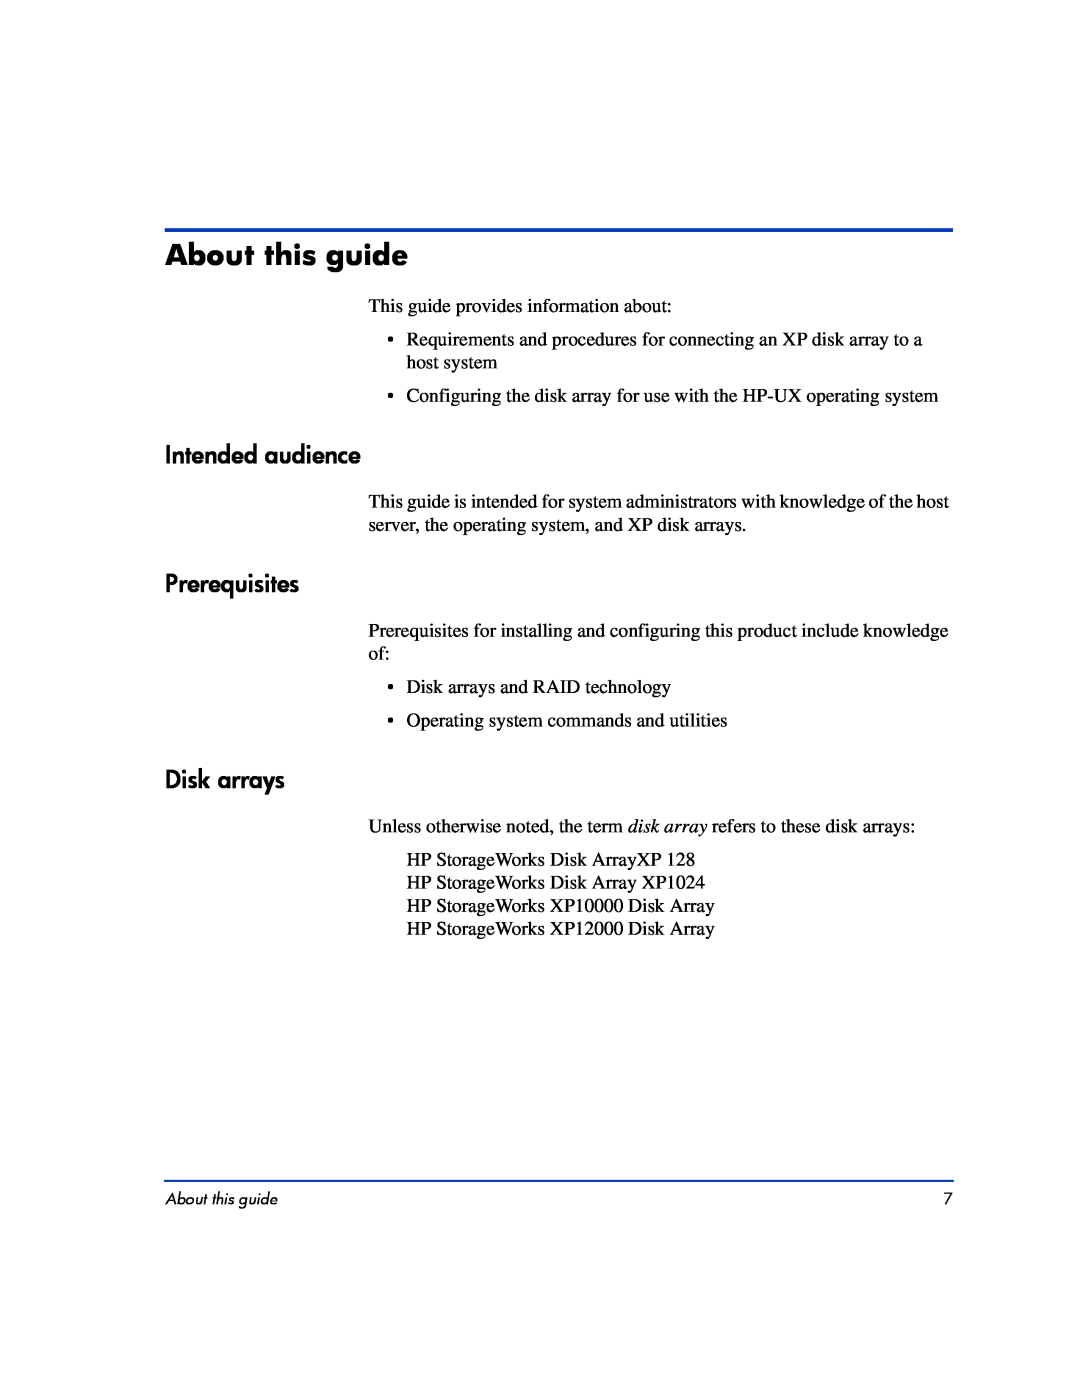 HP XP10000, XP128 manual About this guide, Intended audience, Prerequisites, Disk arrays 